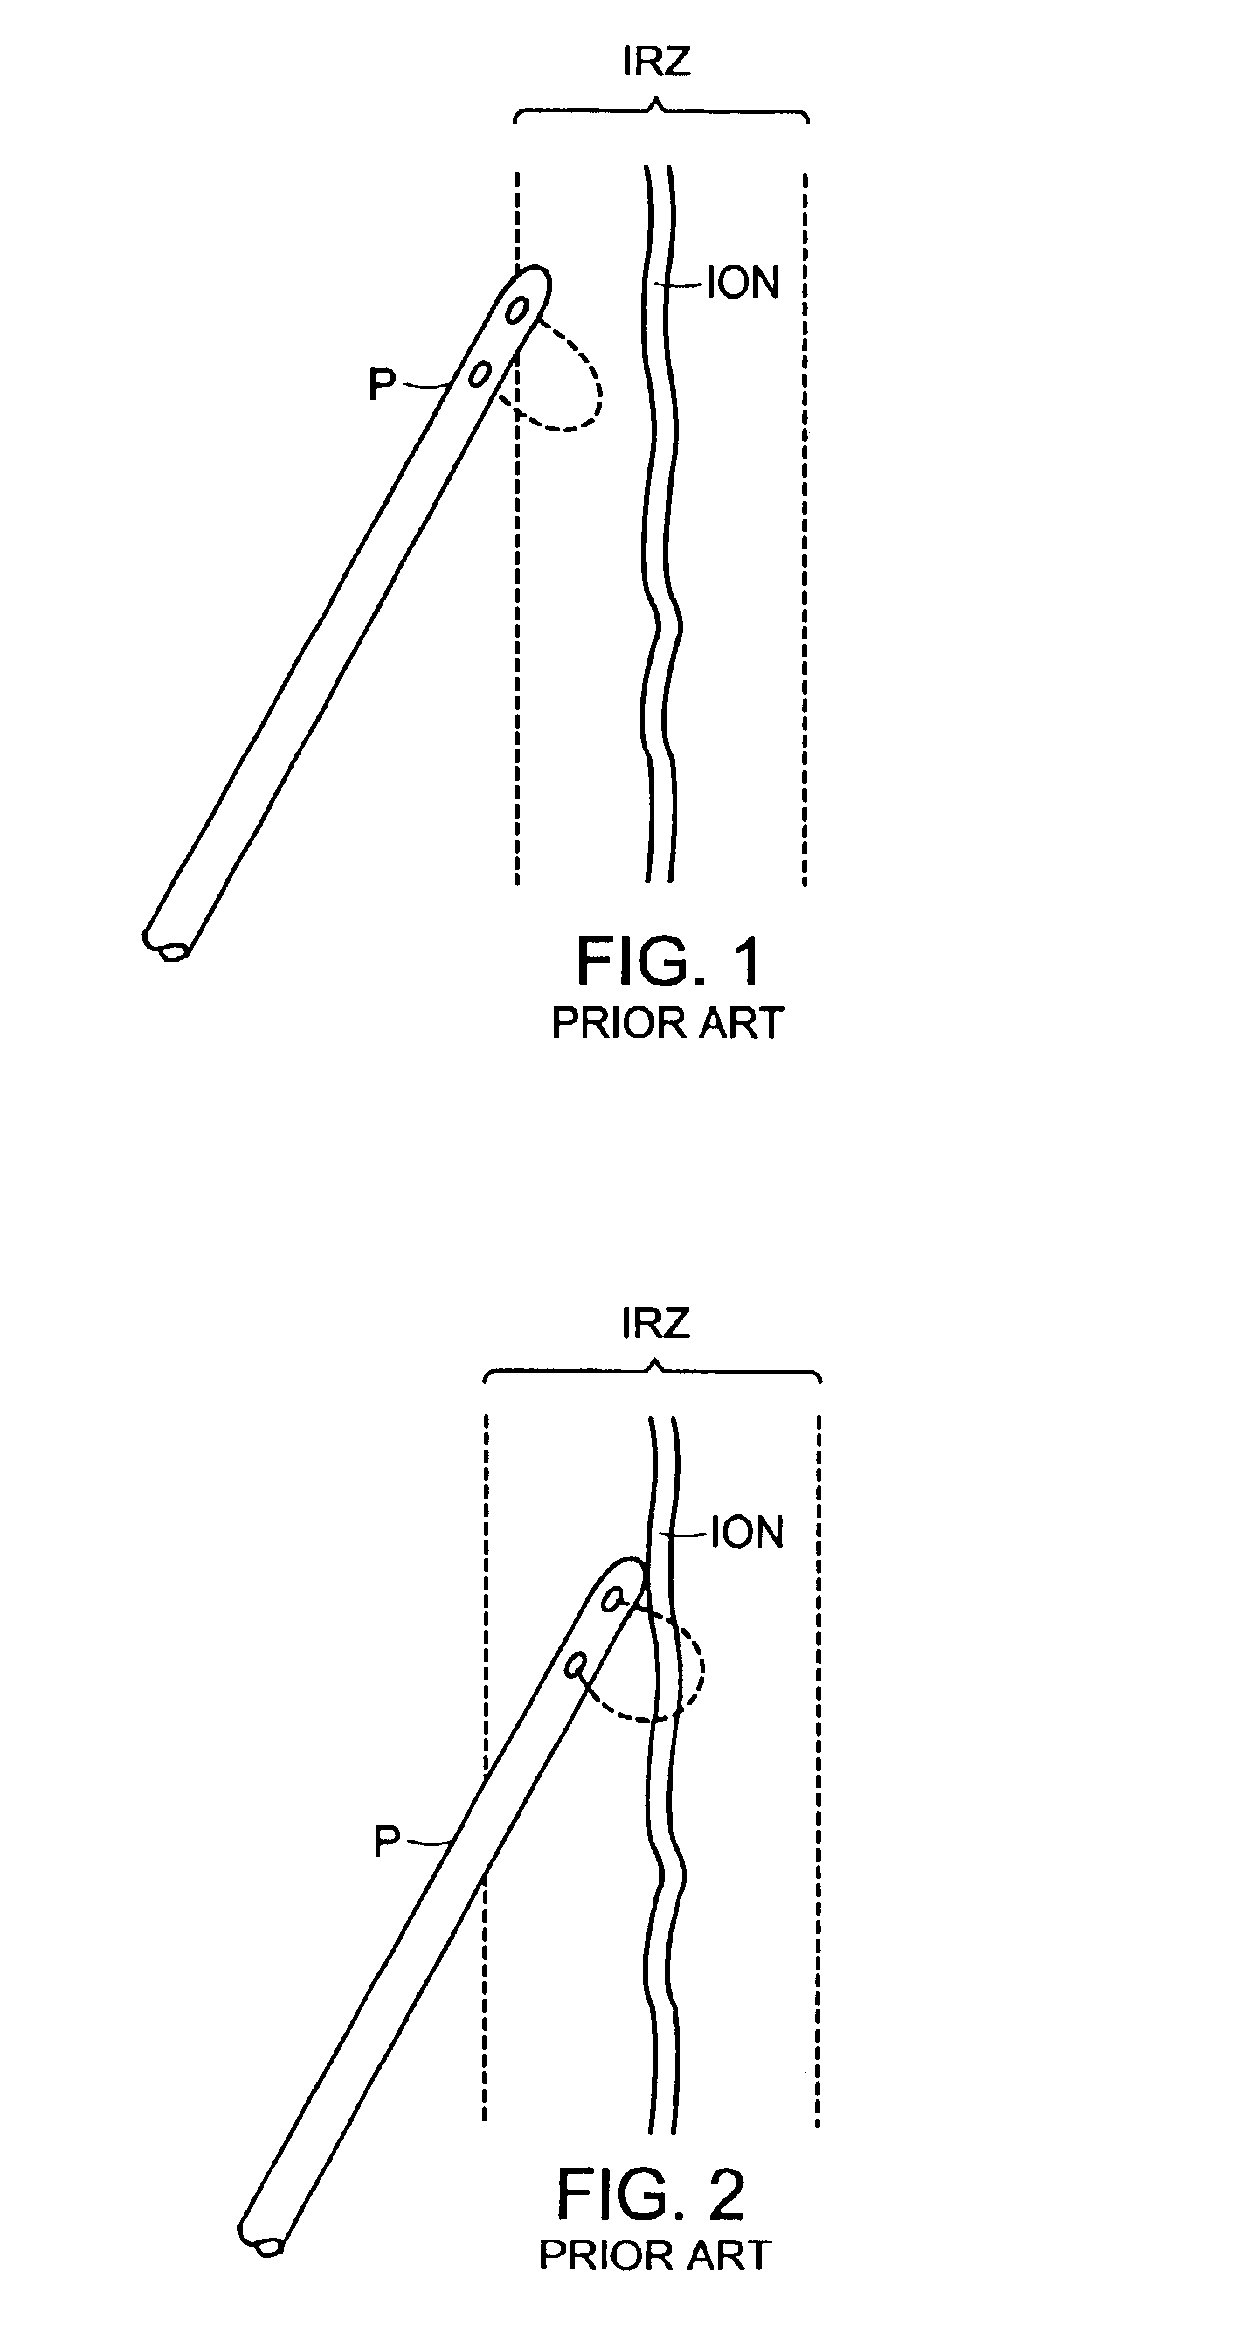 Method of straddling an intraosseous nerve